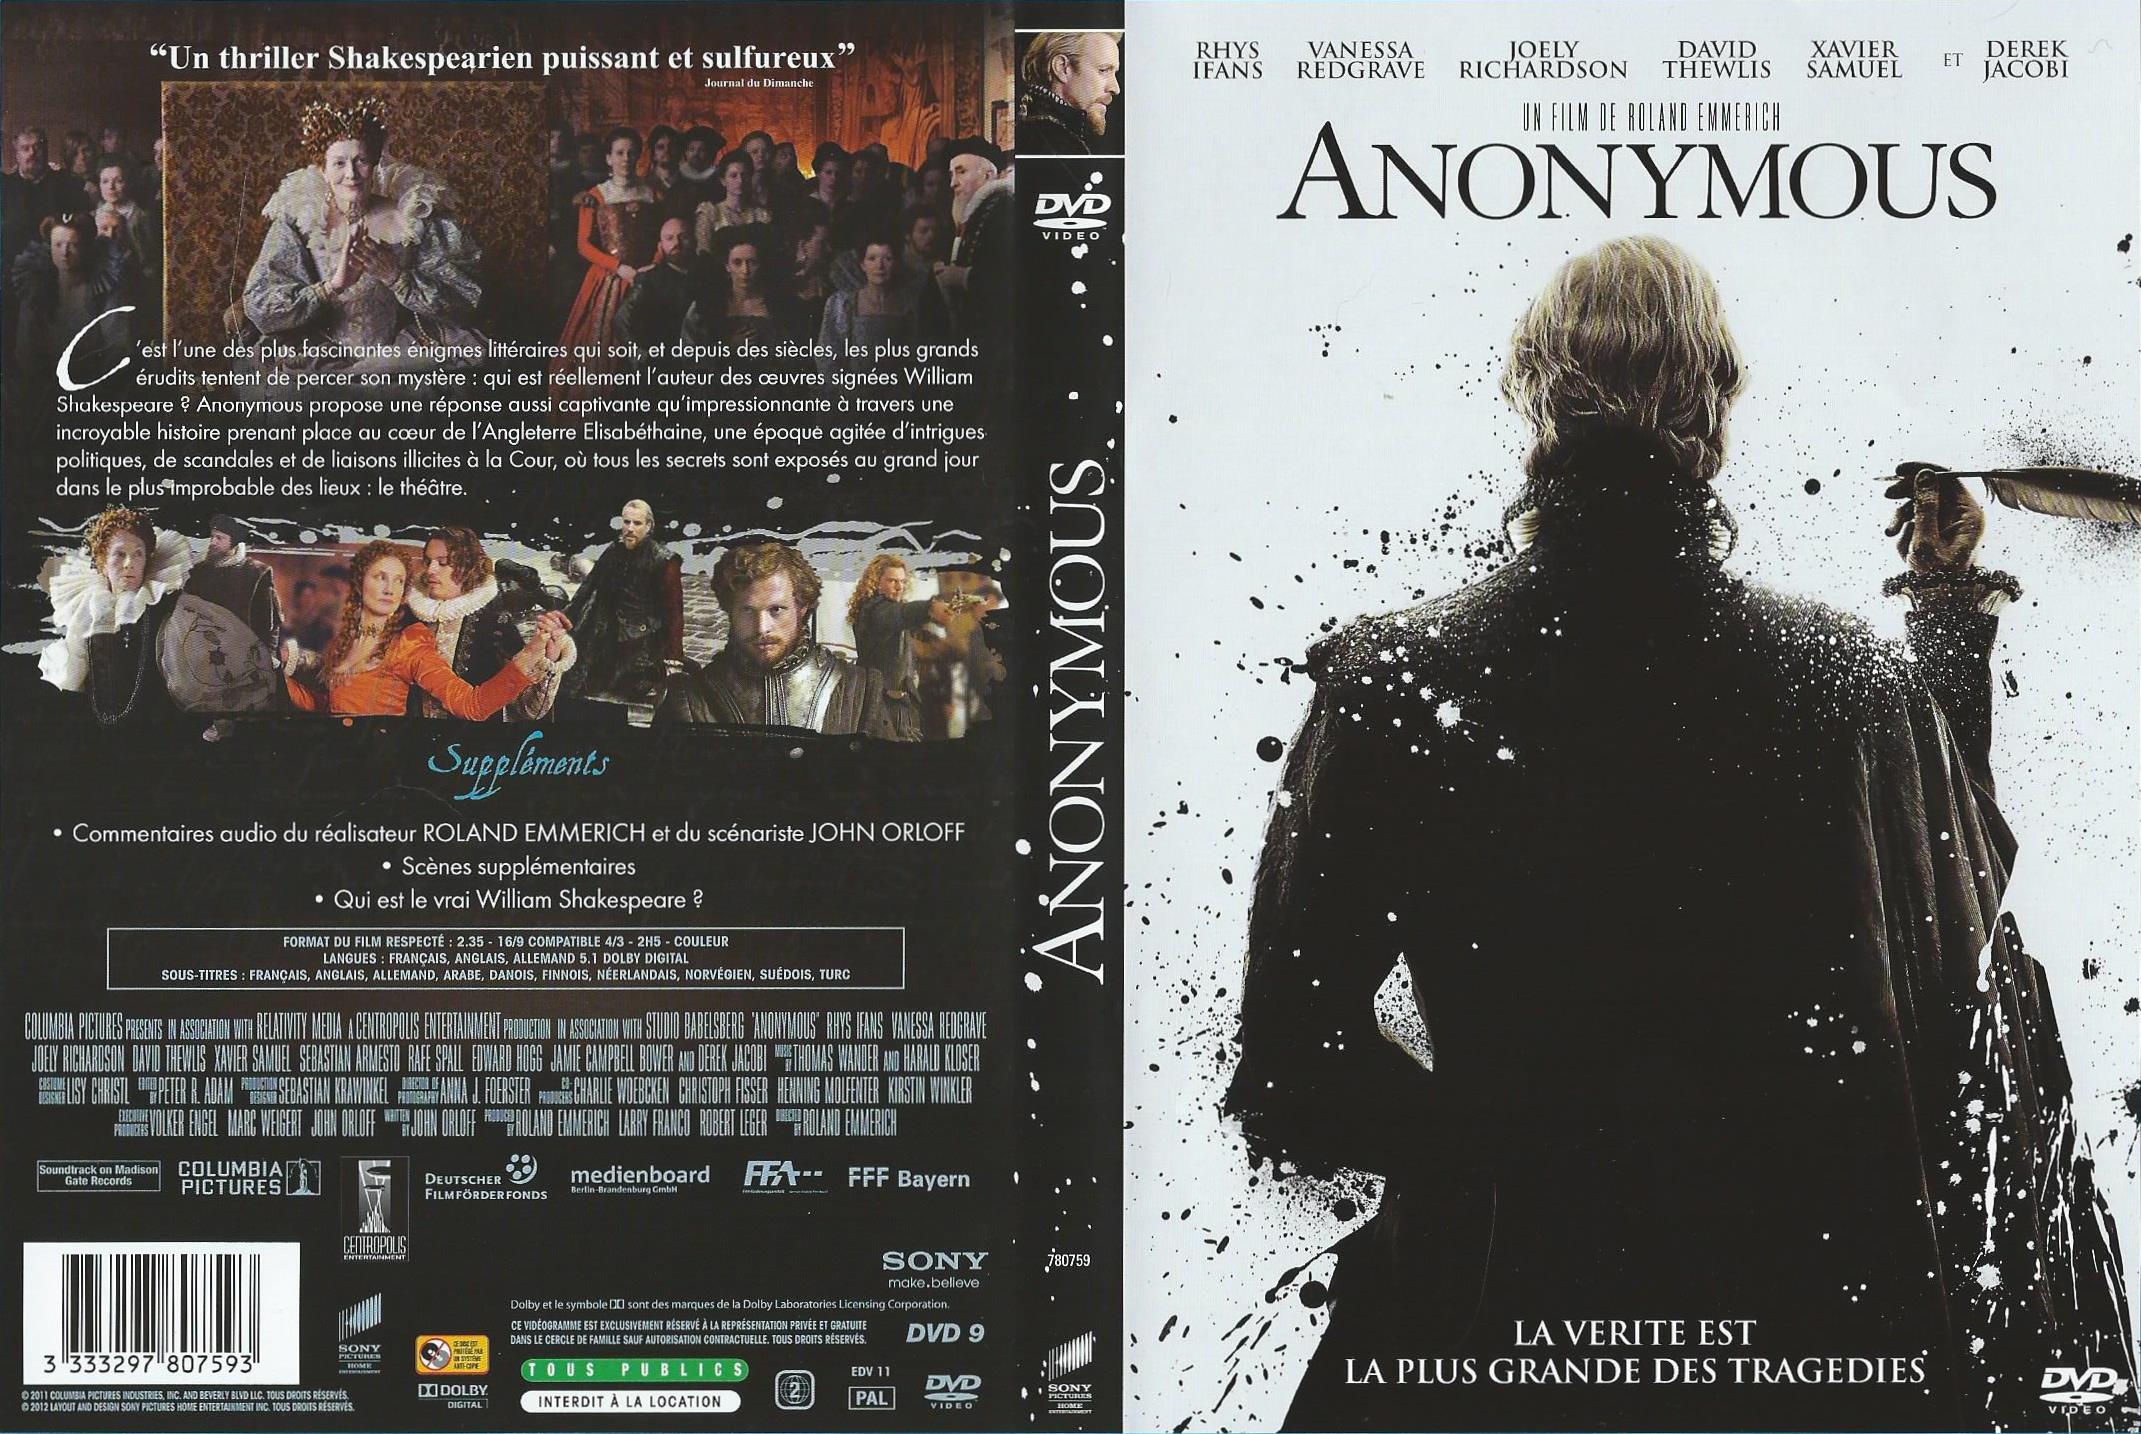 Jaquette DVD Anonymous v2